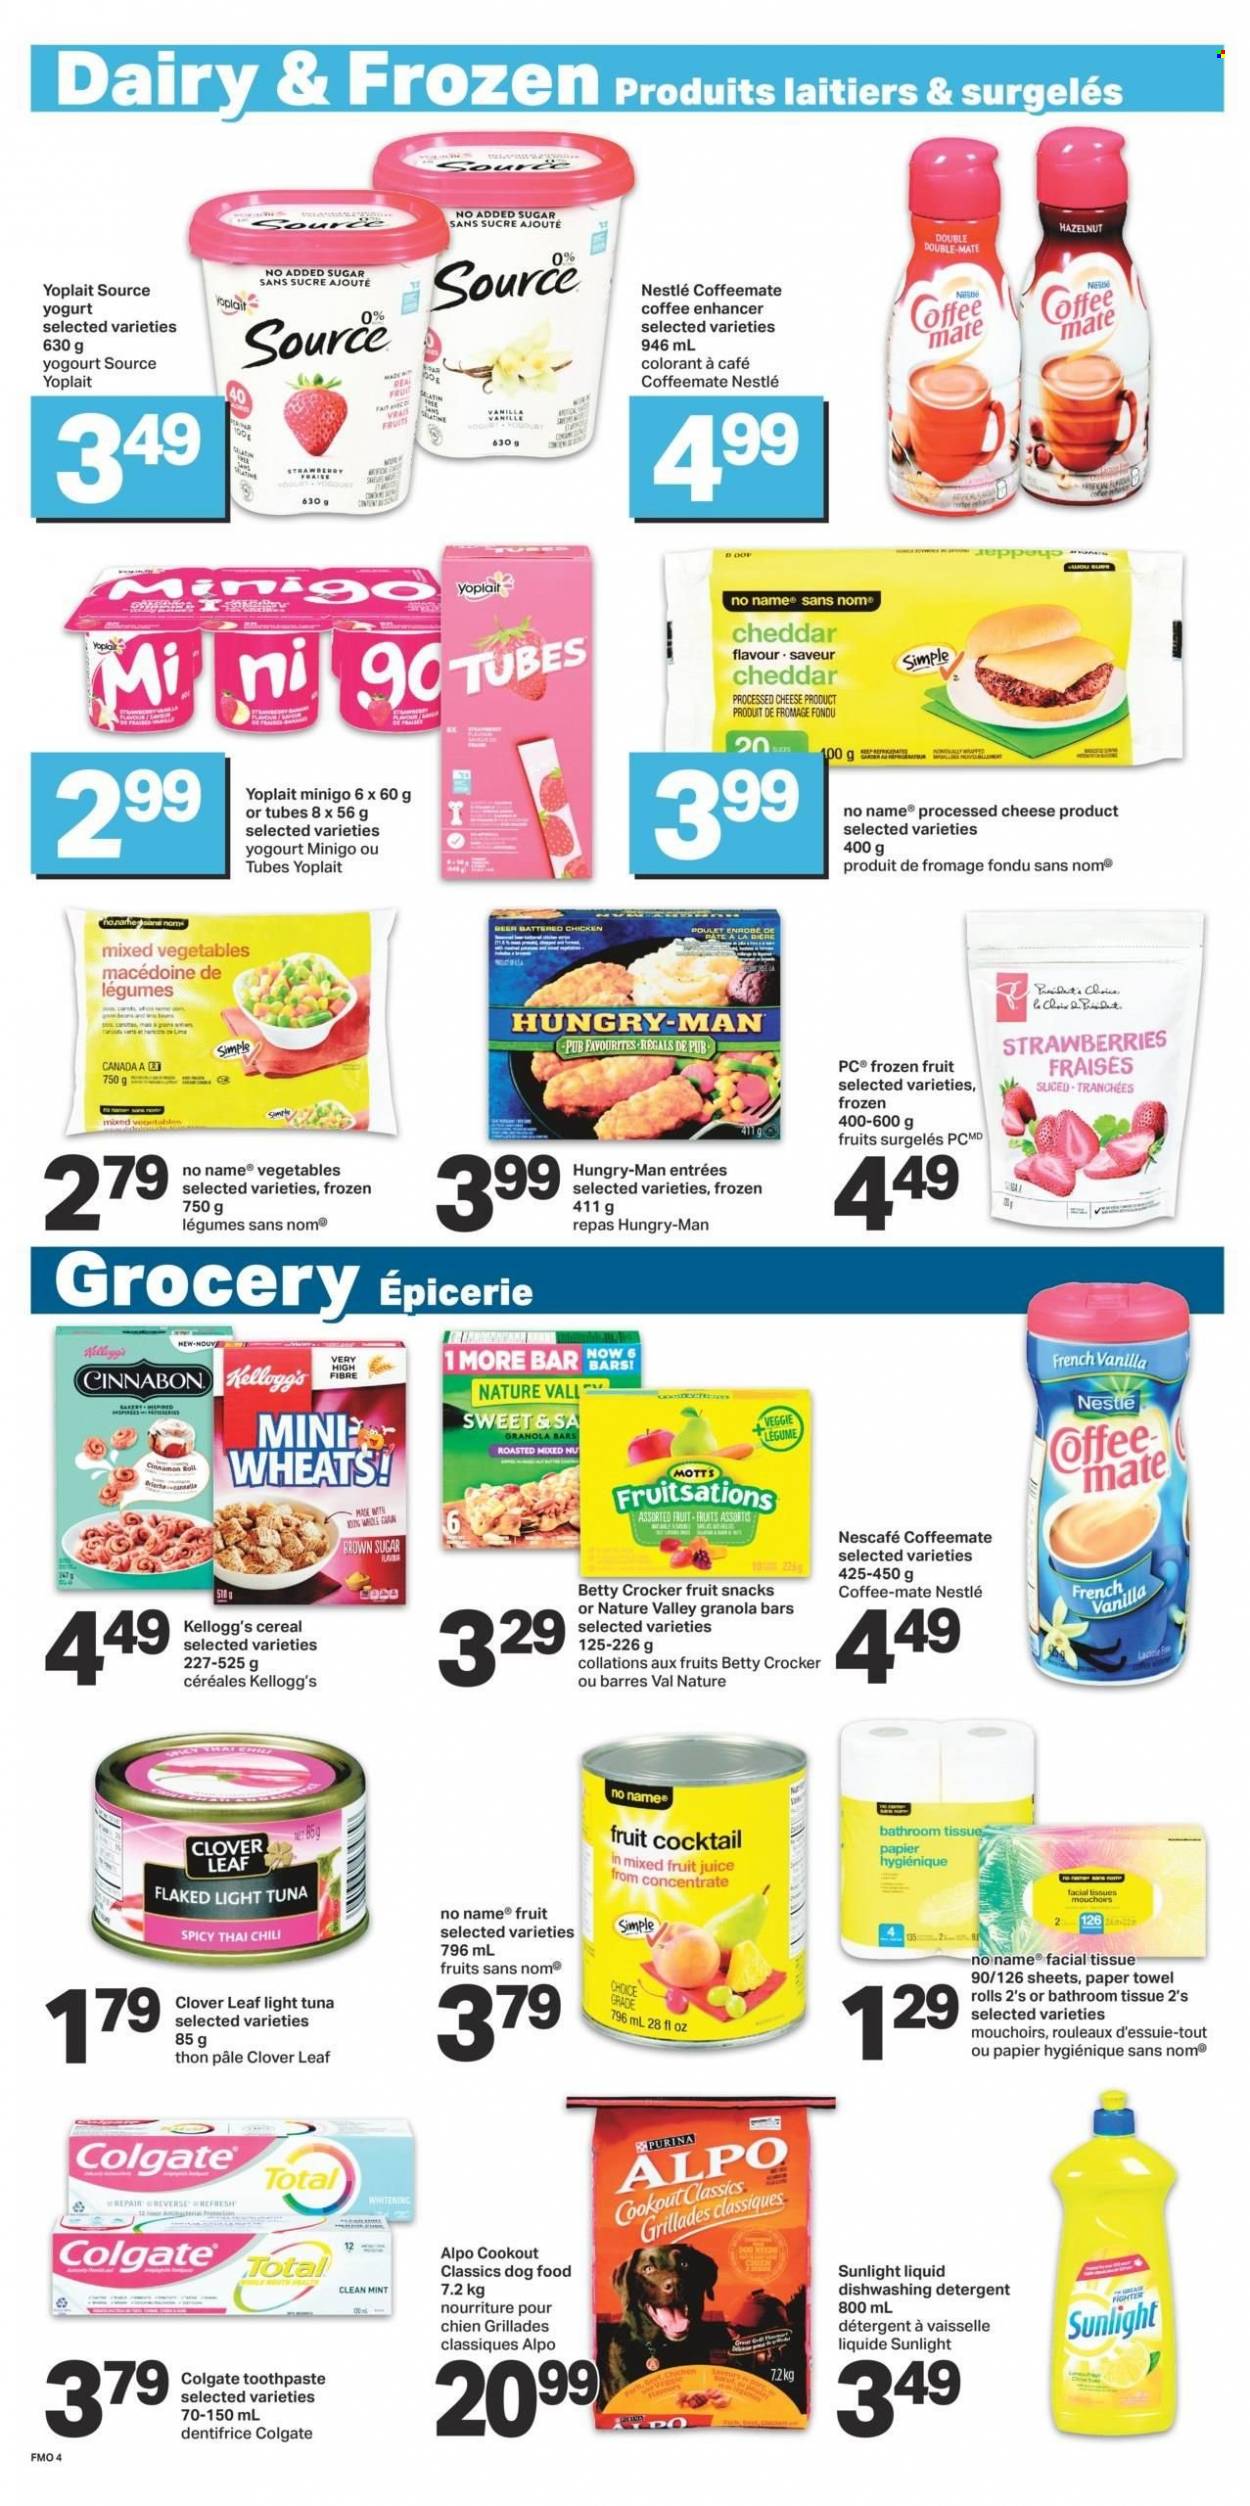 thumbnail - Freshmart Flyer - March 23, 2023 - March 29, 2023 - Sales products - cinnamon roll, strawberries, Mott's, No Name, cheddar, Président, yoghurt, Clover, Yoplait, Coffee-Mate, mixed vegetables, Kellogg's, fruit snack, cane sugar, light tuna, cereals, granola bar, Nature Valley, juice, fruit juice, beer, chicken, bath tissue, paper towels, Sunlight, toothpaste, facial tissues, animal food, dog food, Purina, Alpo, detergent, Colgate, Nestlé, Nescafé. Page 4.